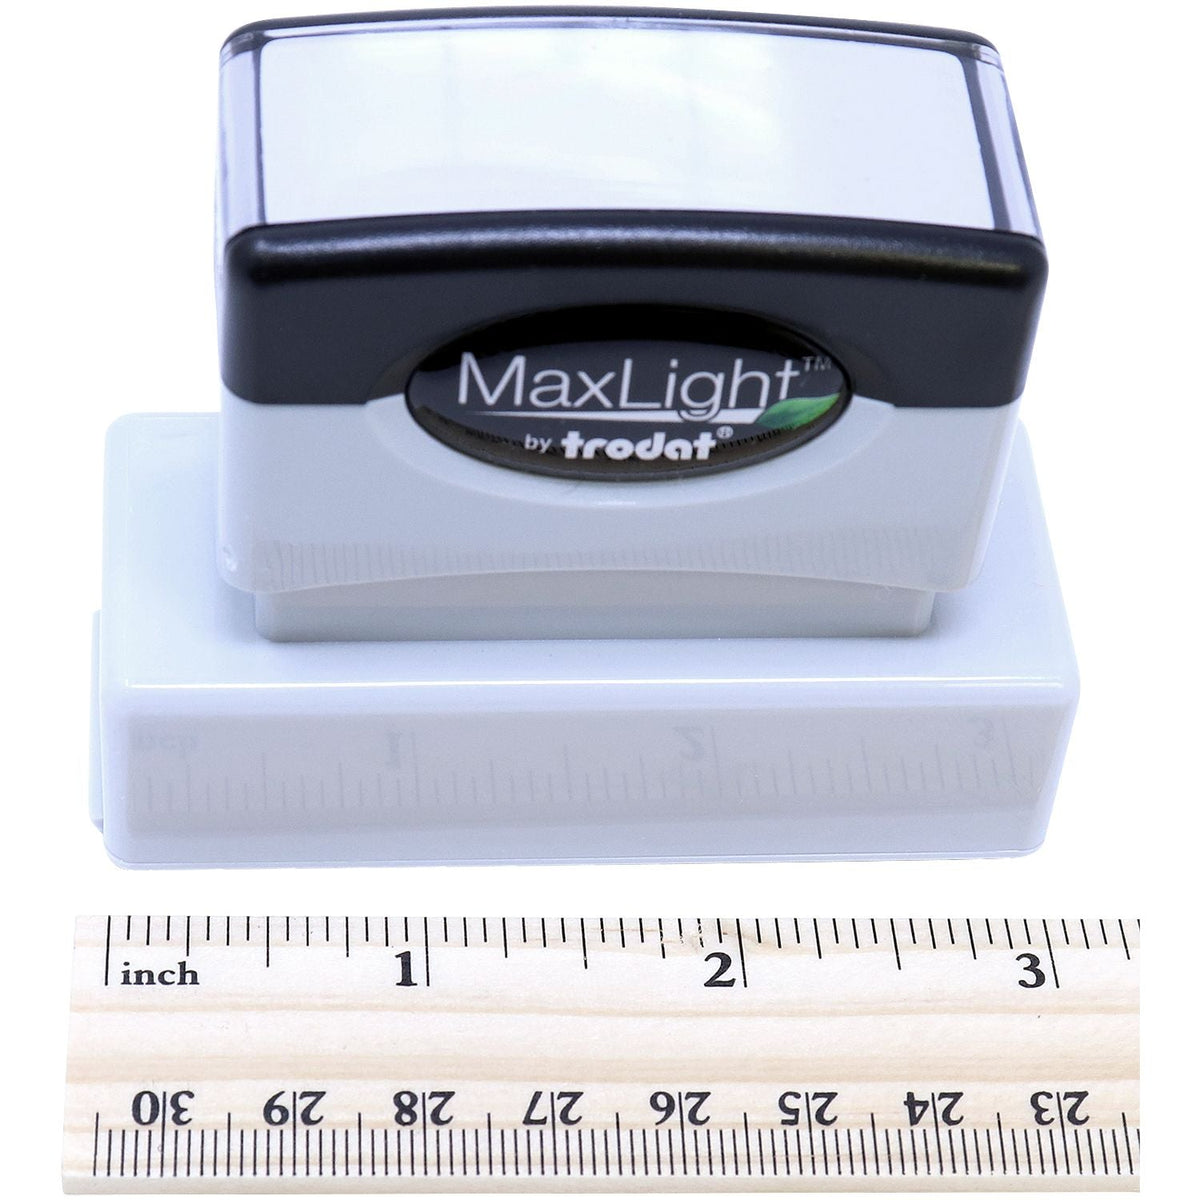 Maxlight Pre Inked Stamp Xl2 145 Front Ruler